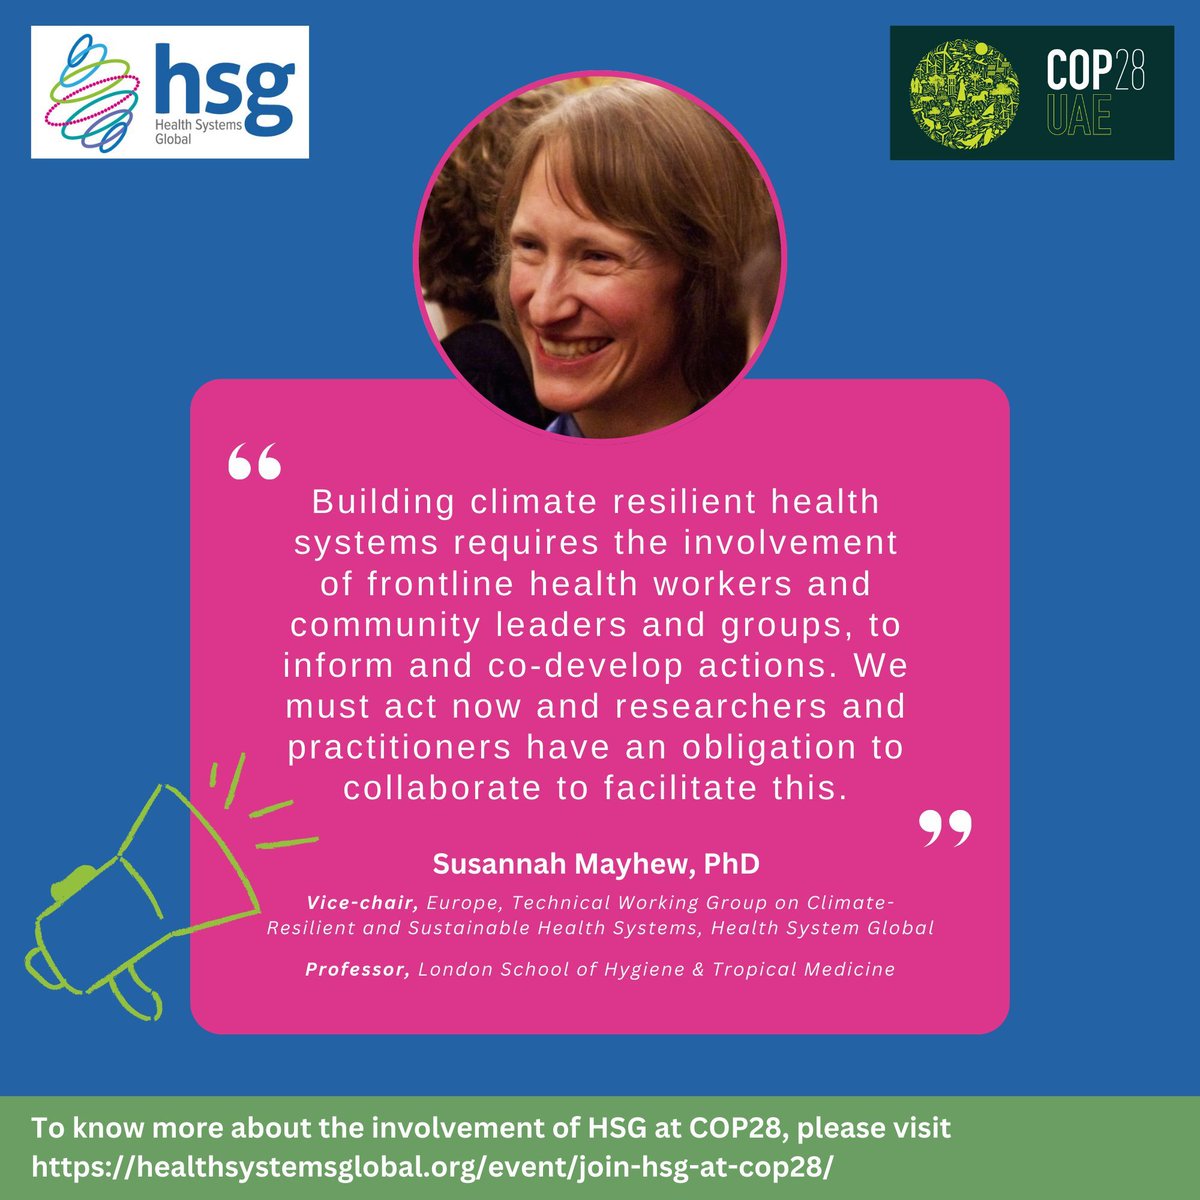 🌍 Meet Susannah Mayhew, PhD, Vice-Chair for Europe, Thematic Working Group on Climate Resilient and Sustainable Health Systems at Health Systems Global! 🌿 Time to act is now! Researchers and practitioners, let's unite for collaborative action at #COP28 buff.ly/49YX9jf